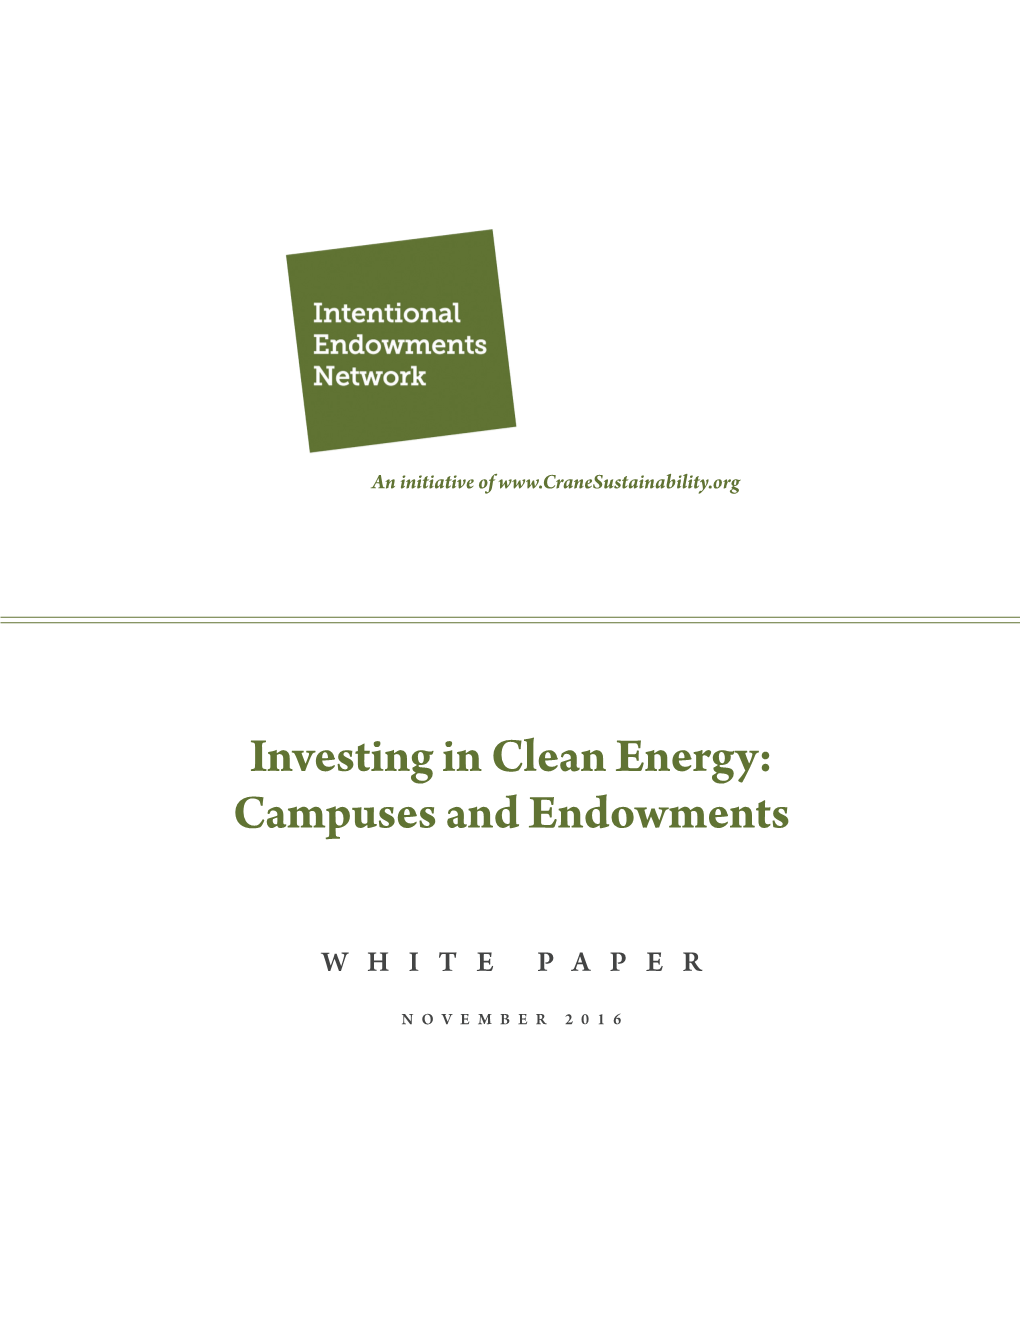 Investing in Clean Energy: Campuses and Endowments